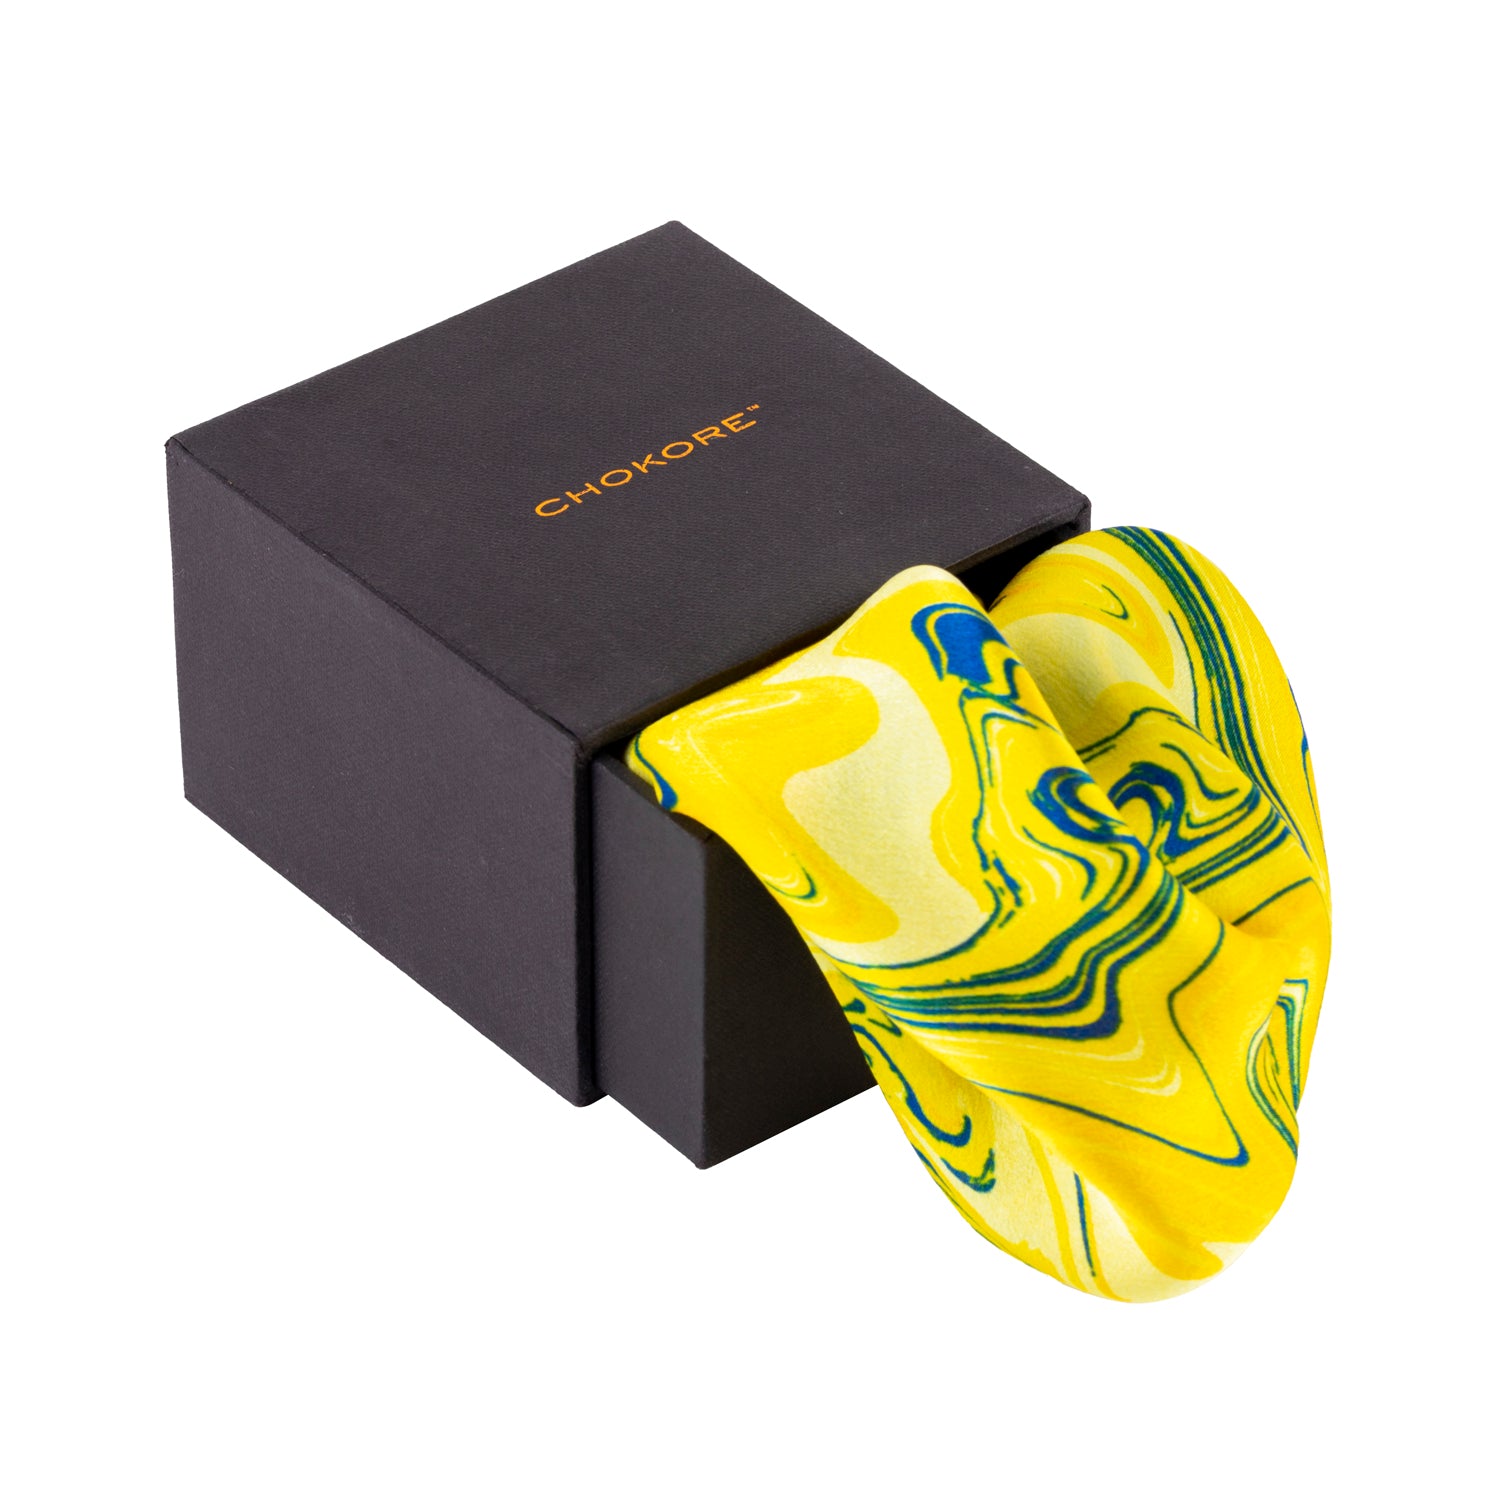 Chokore Yellow Satin Silk pocket square from the Marble Collection